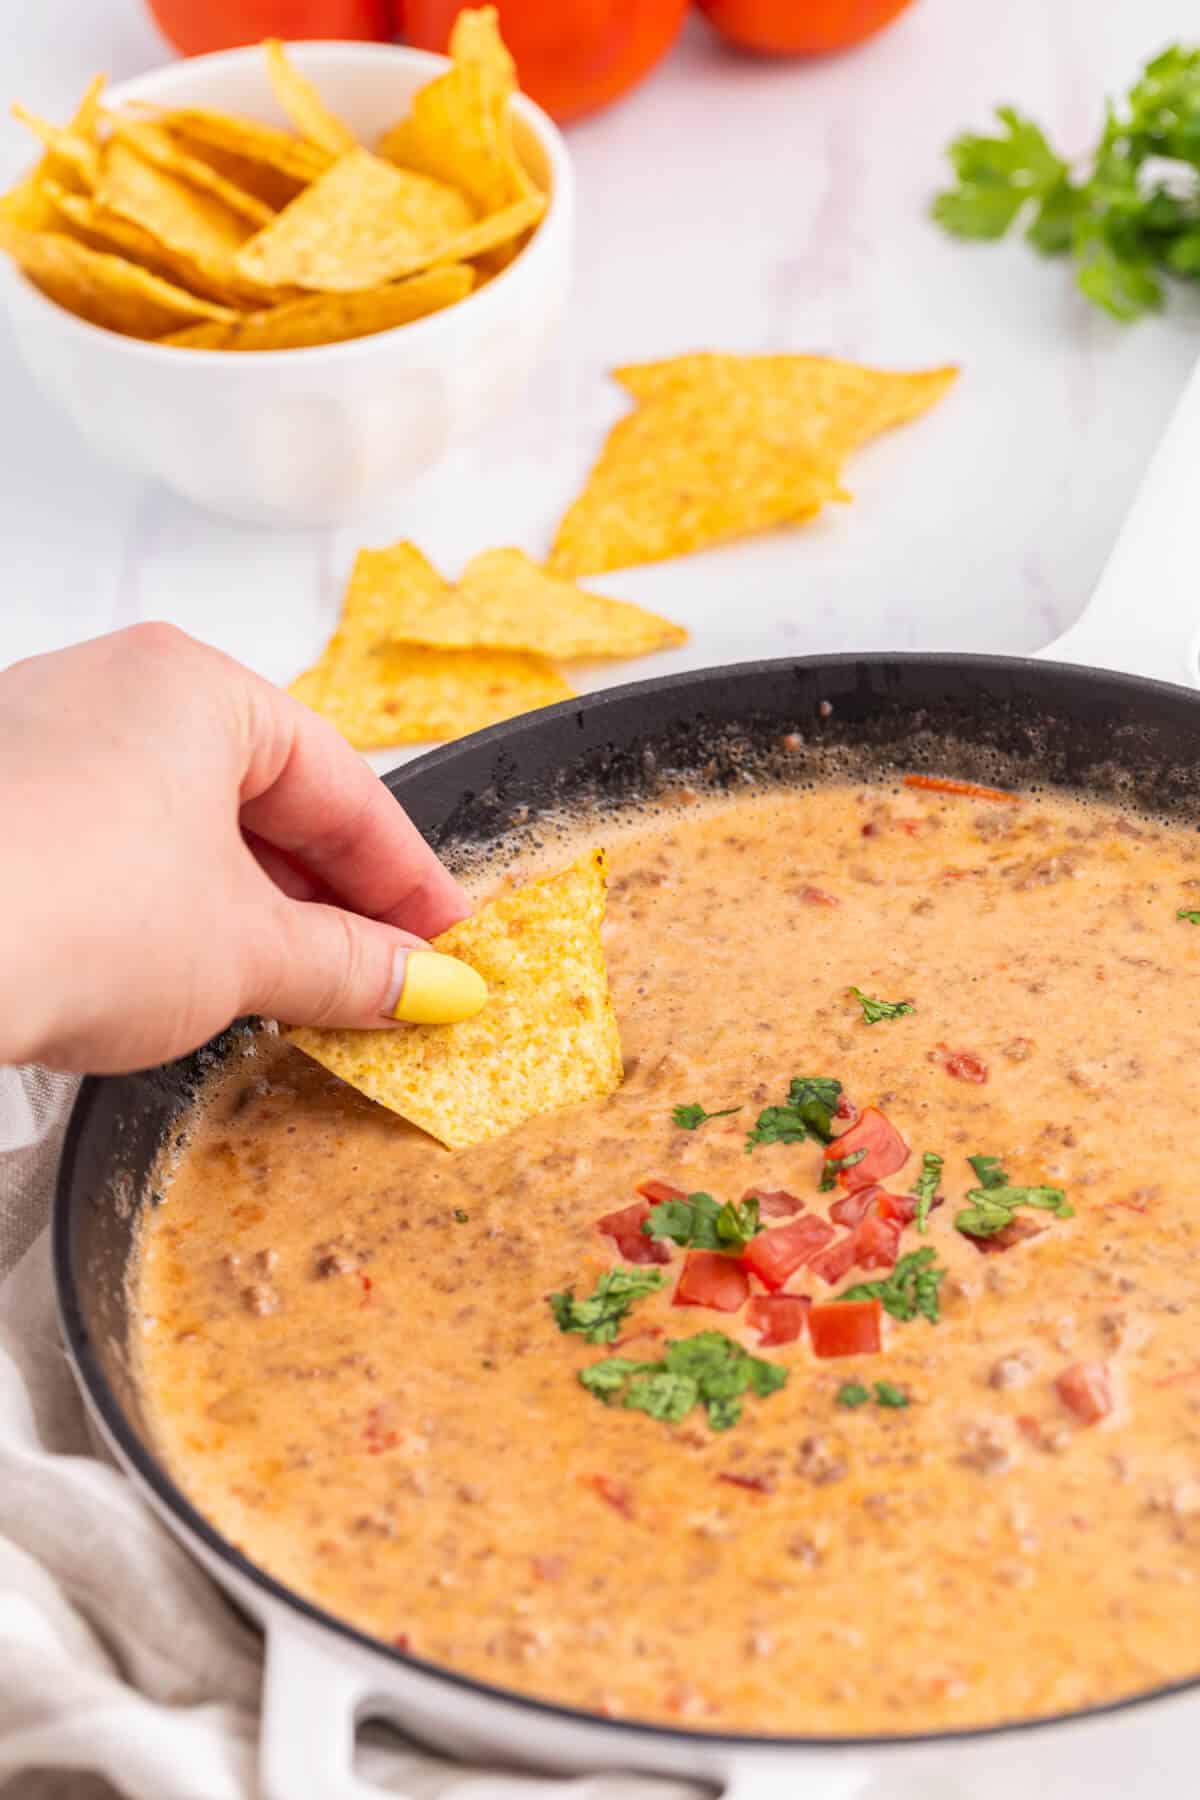 A hand dipping a tortilla chip in a skillet of Rotel dip.